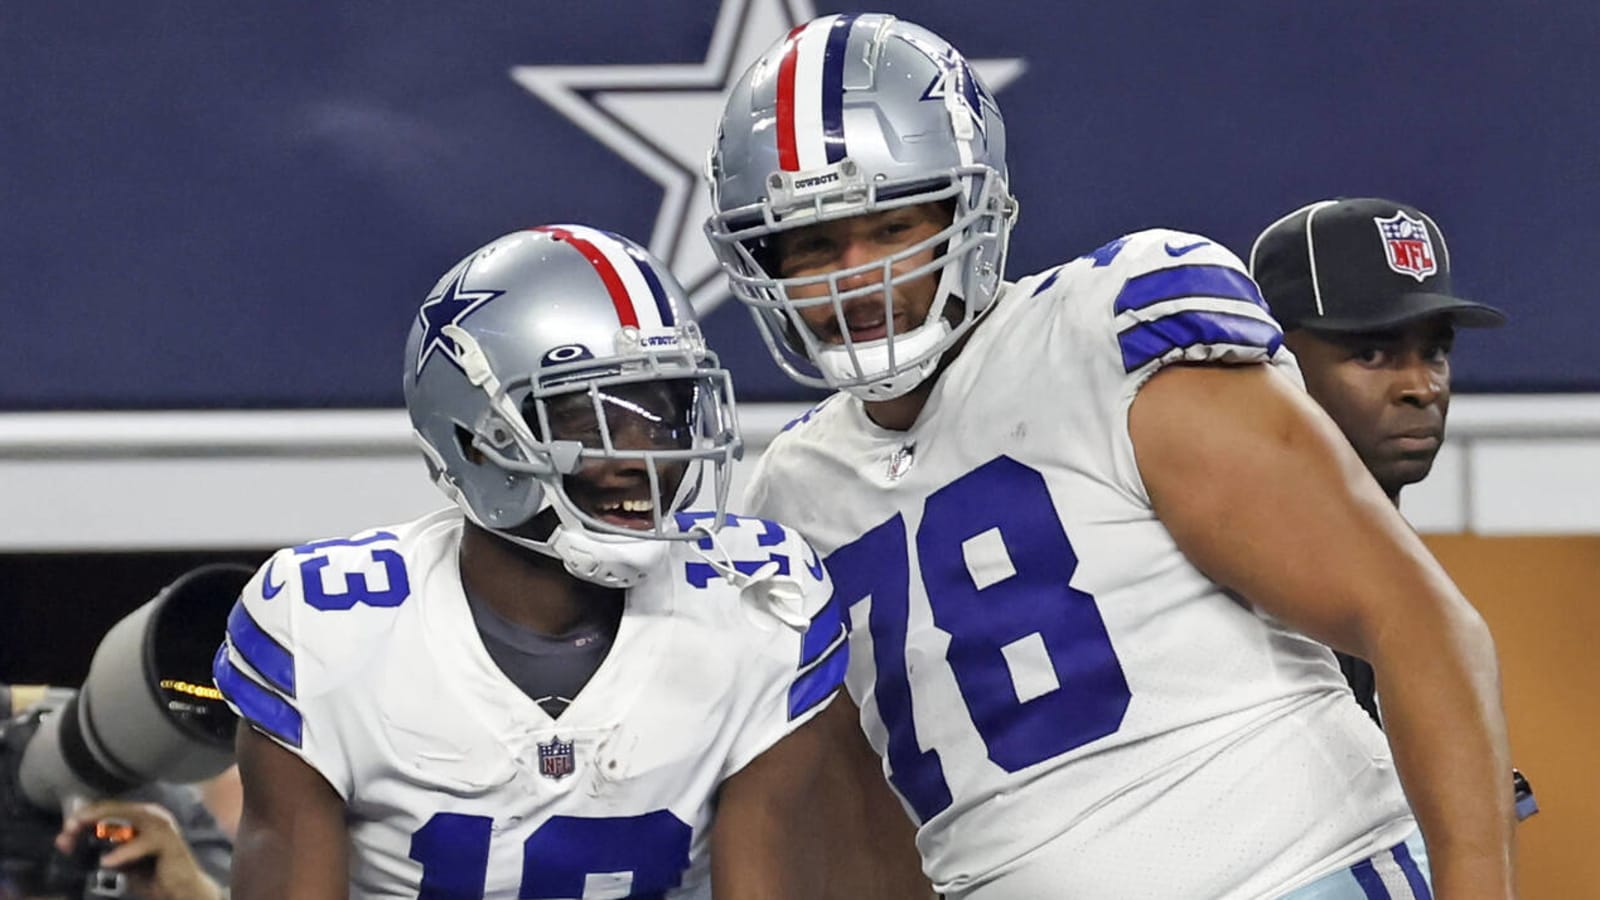 The offensive line should be the primary focus of the Dallas Cowboys